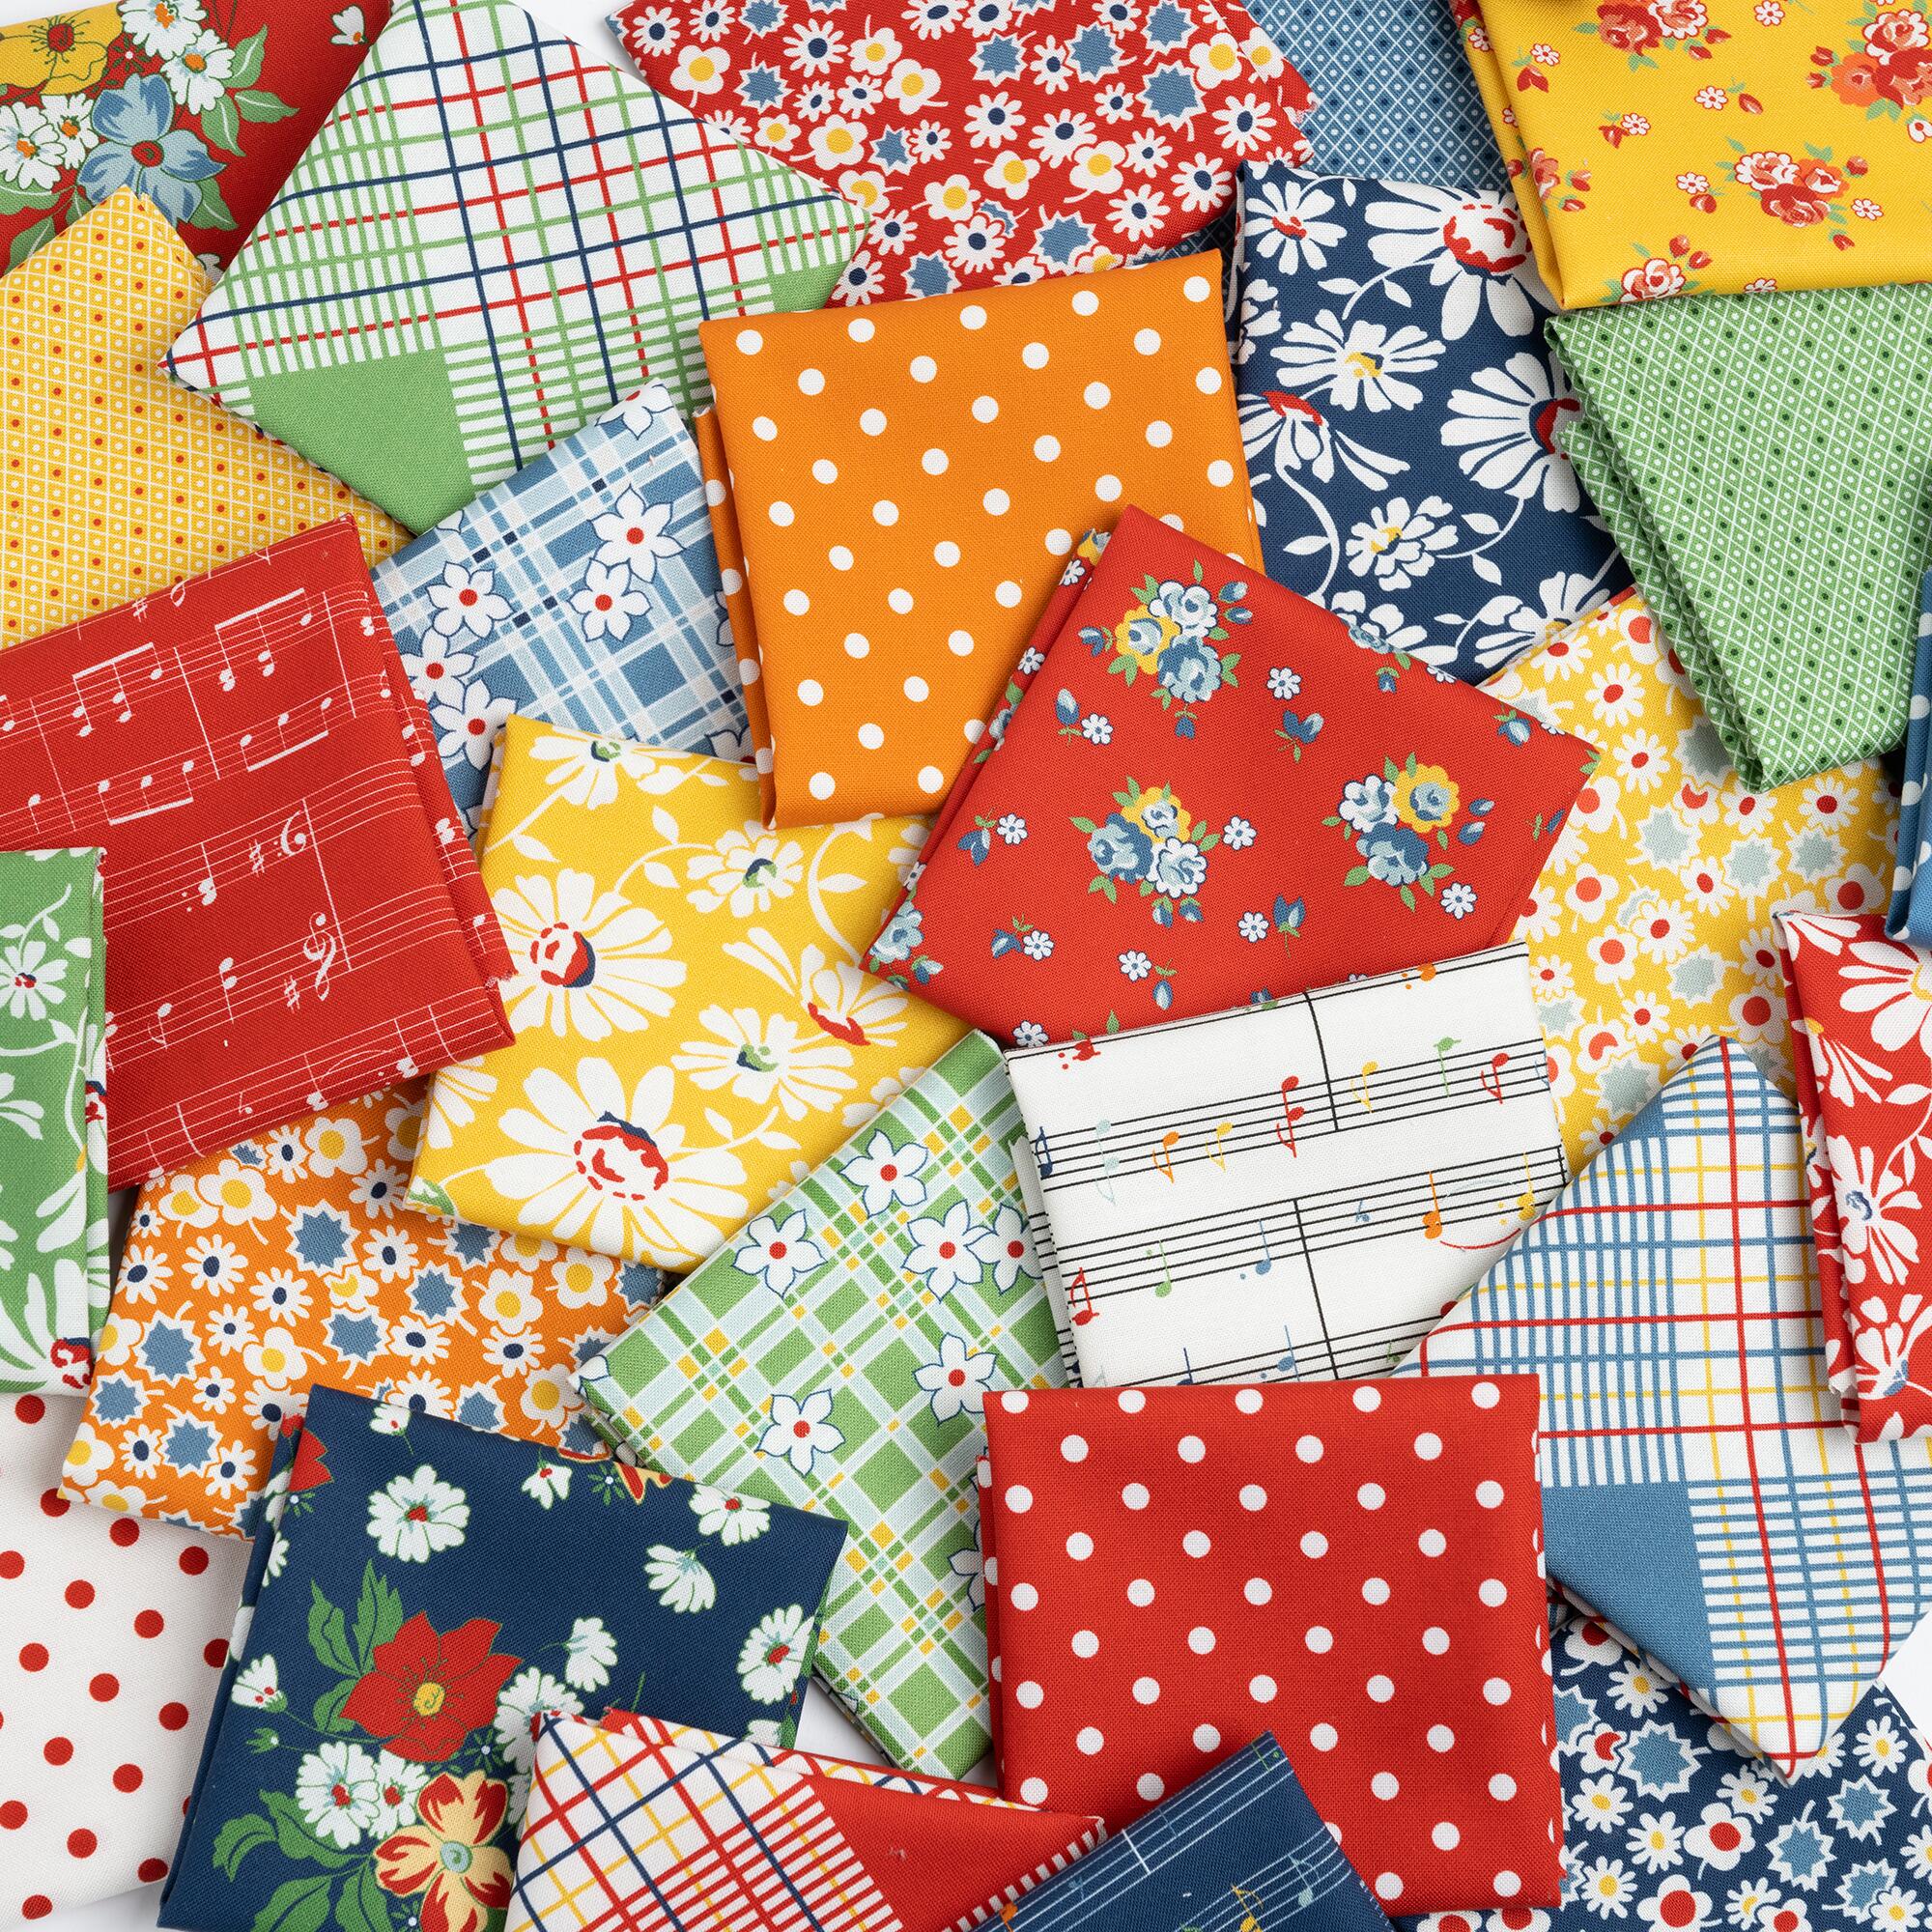 moda, sweet melodies,american jane,patchwork squares,precuts,vintage patchwork,flowers,music,nursery,retro,baby quilt, red,music,polka,stripes,spots,blue